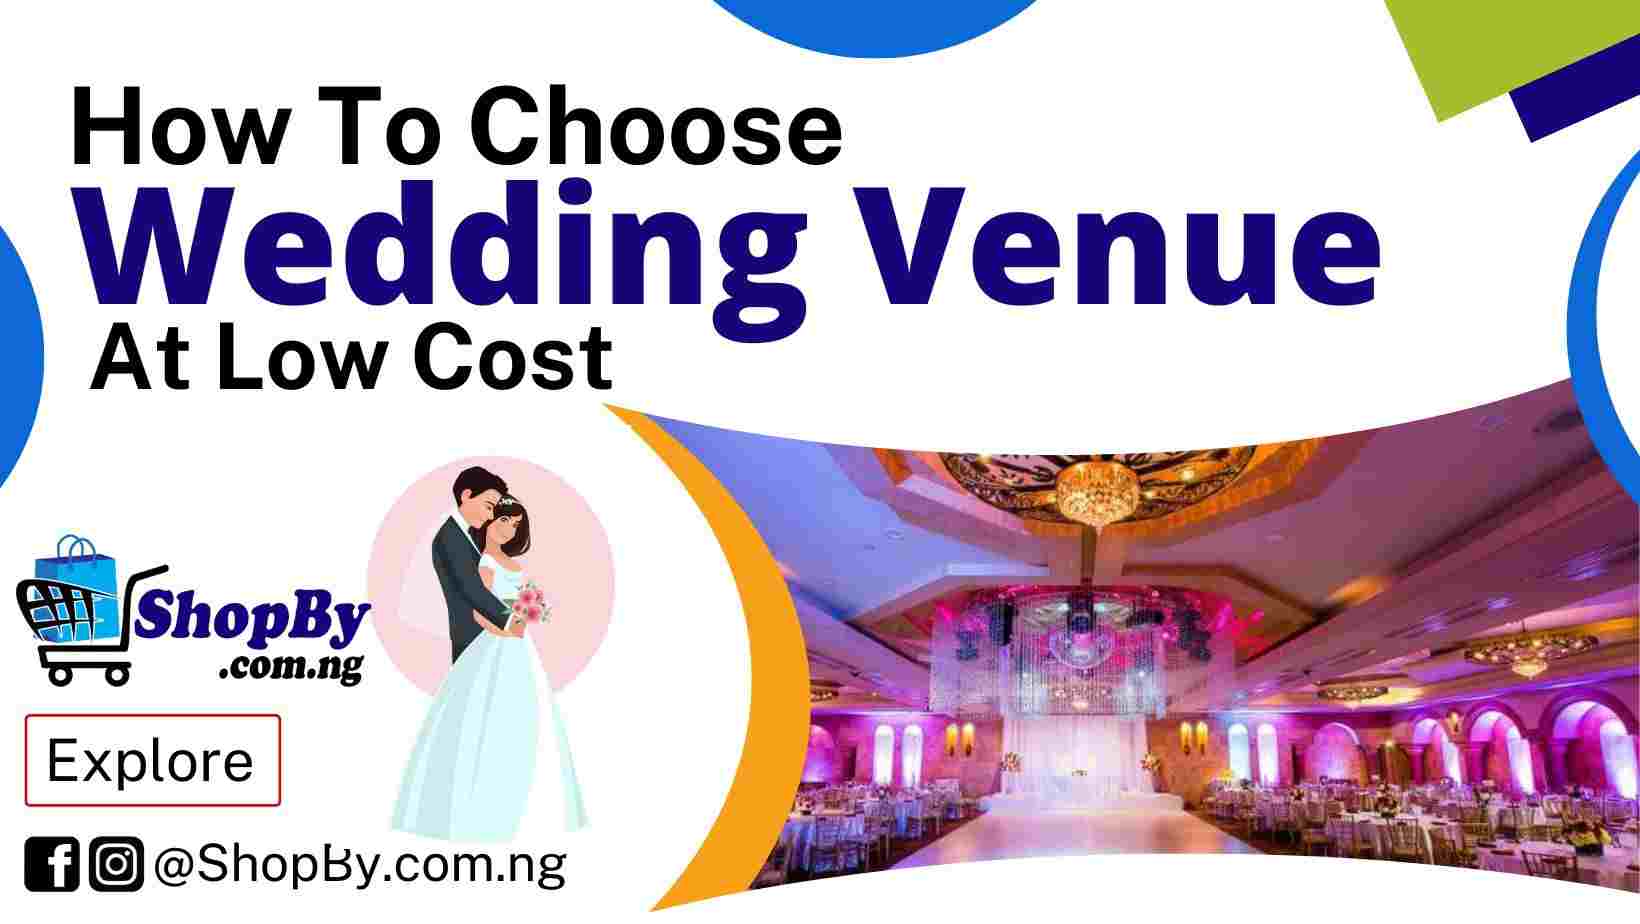 Wedding Venuehow to choose Wedding Venue at low cost shopby online mall